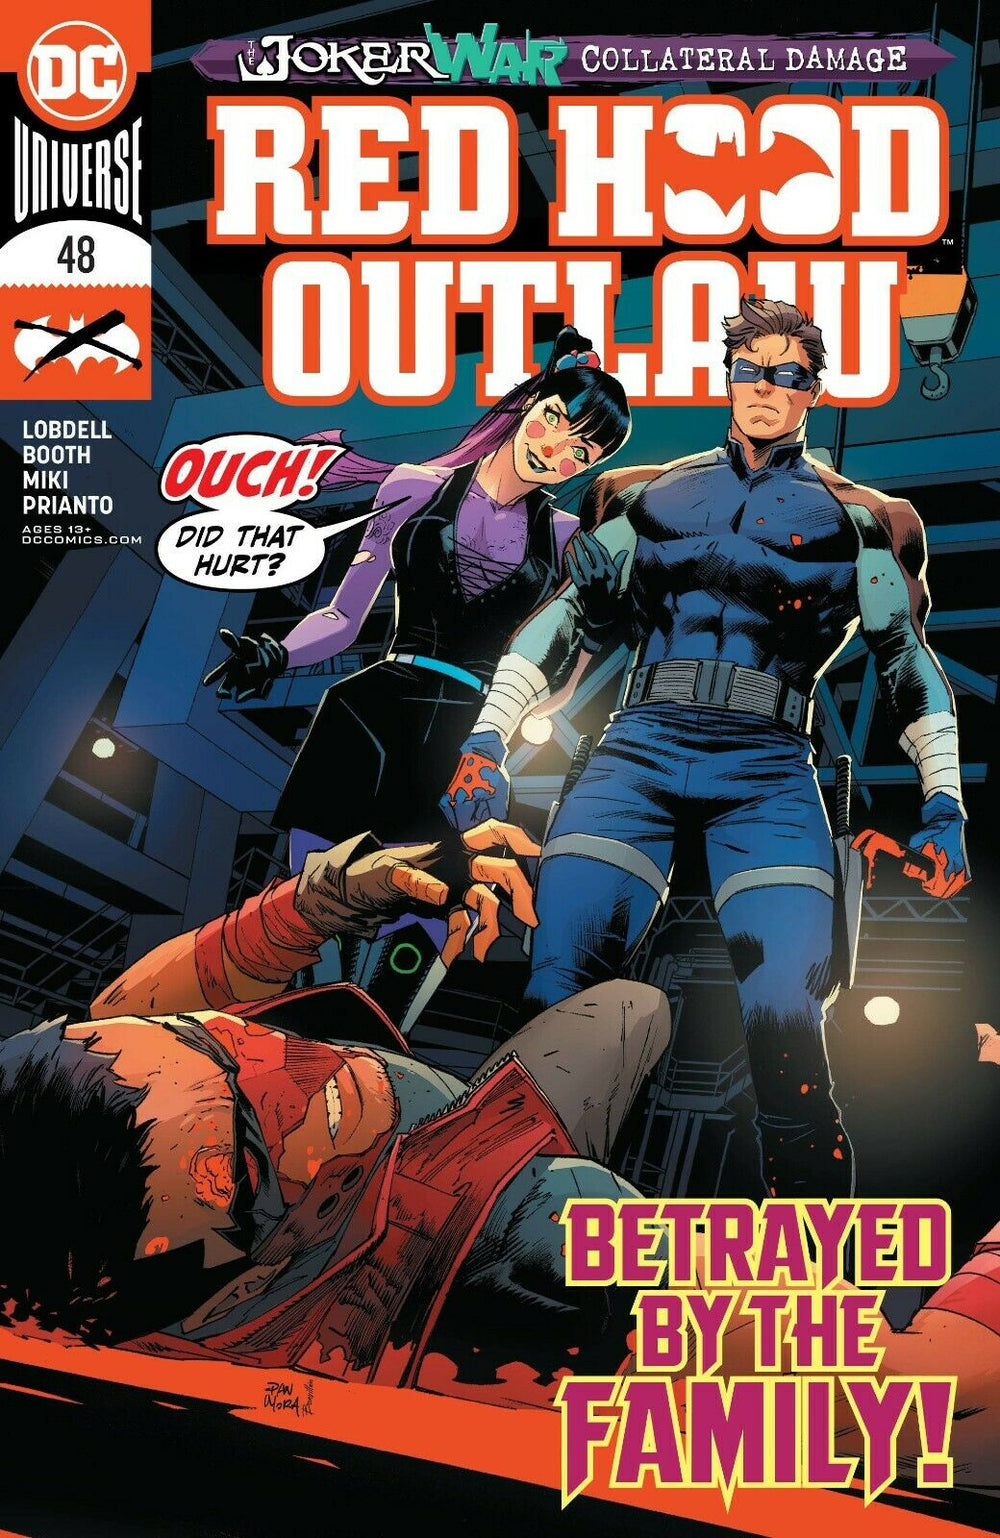 RED HOOD OUTLAW #48 COVER A